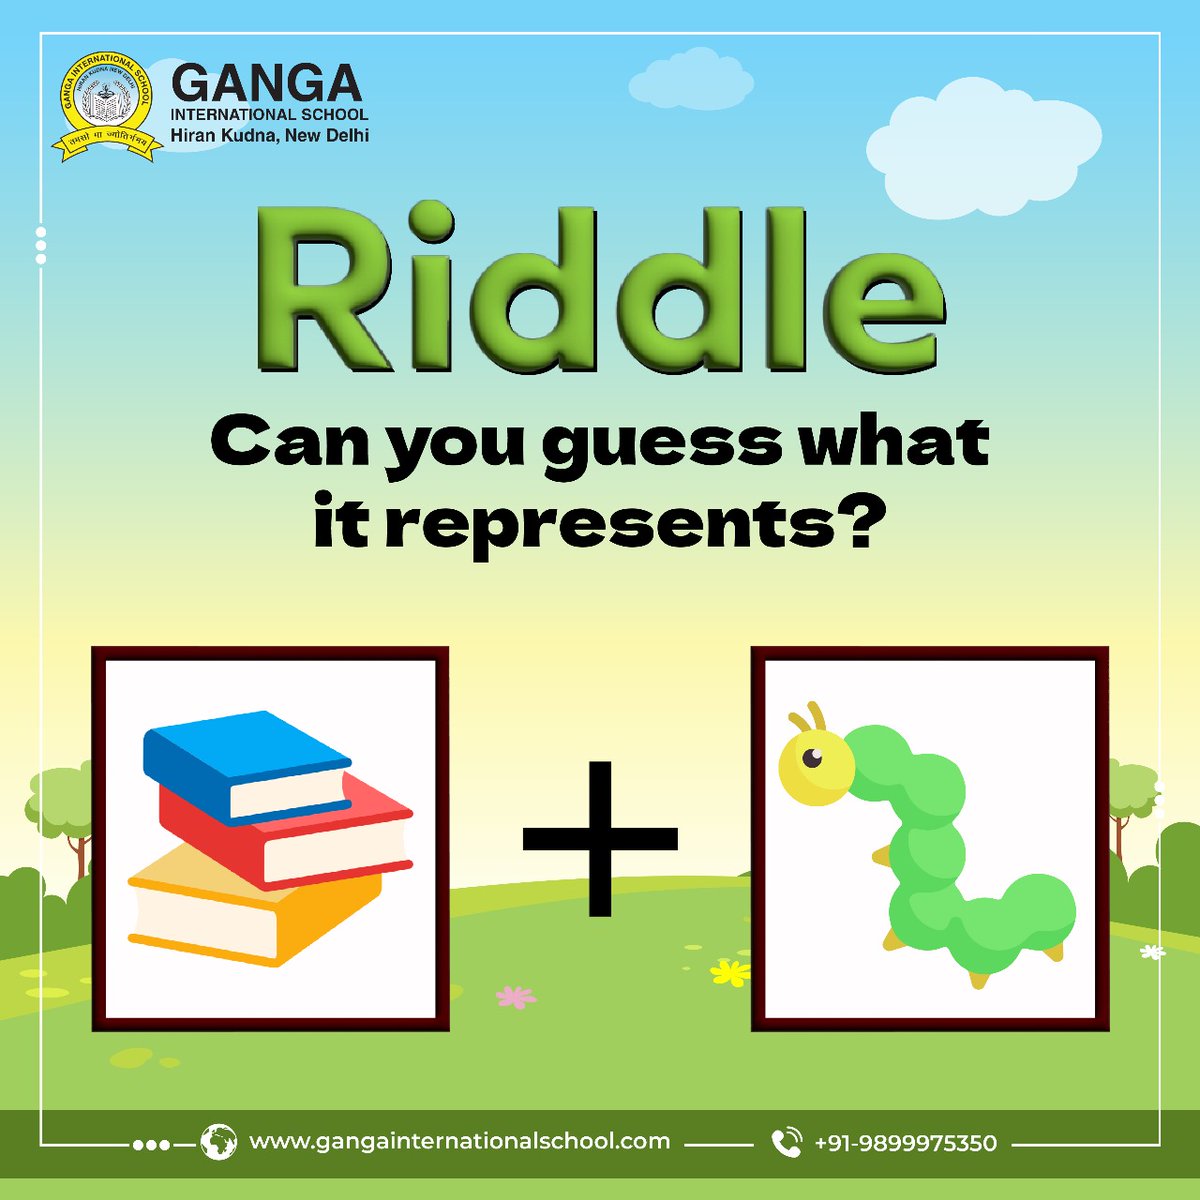 Try this emoji fun and see if you can guess what it represents. Tag your friends to join this fun.
.
.
.
#riddles #riddlesforkids #riddletime #riddleoftheday #riddlechallenge #riddlesdaily #guesstheriddle #educationforall #EducationInnovation #funlearningforkids #GIS